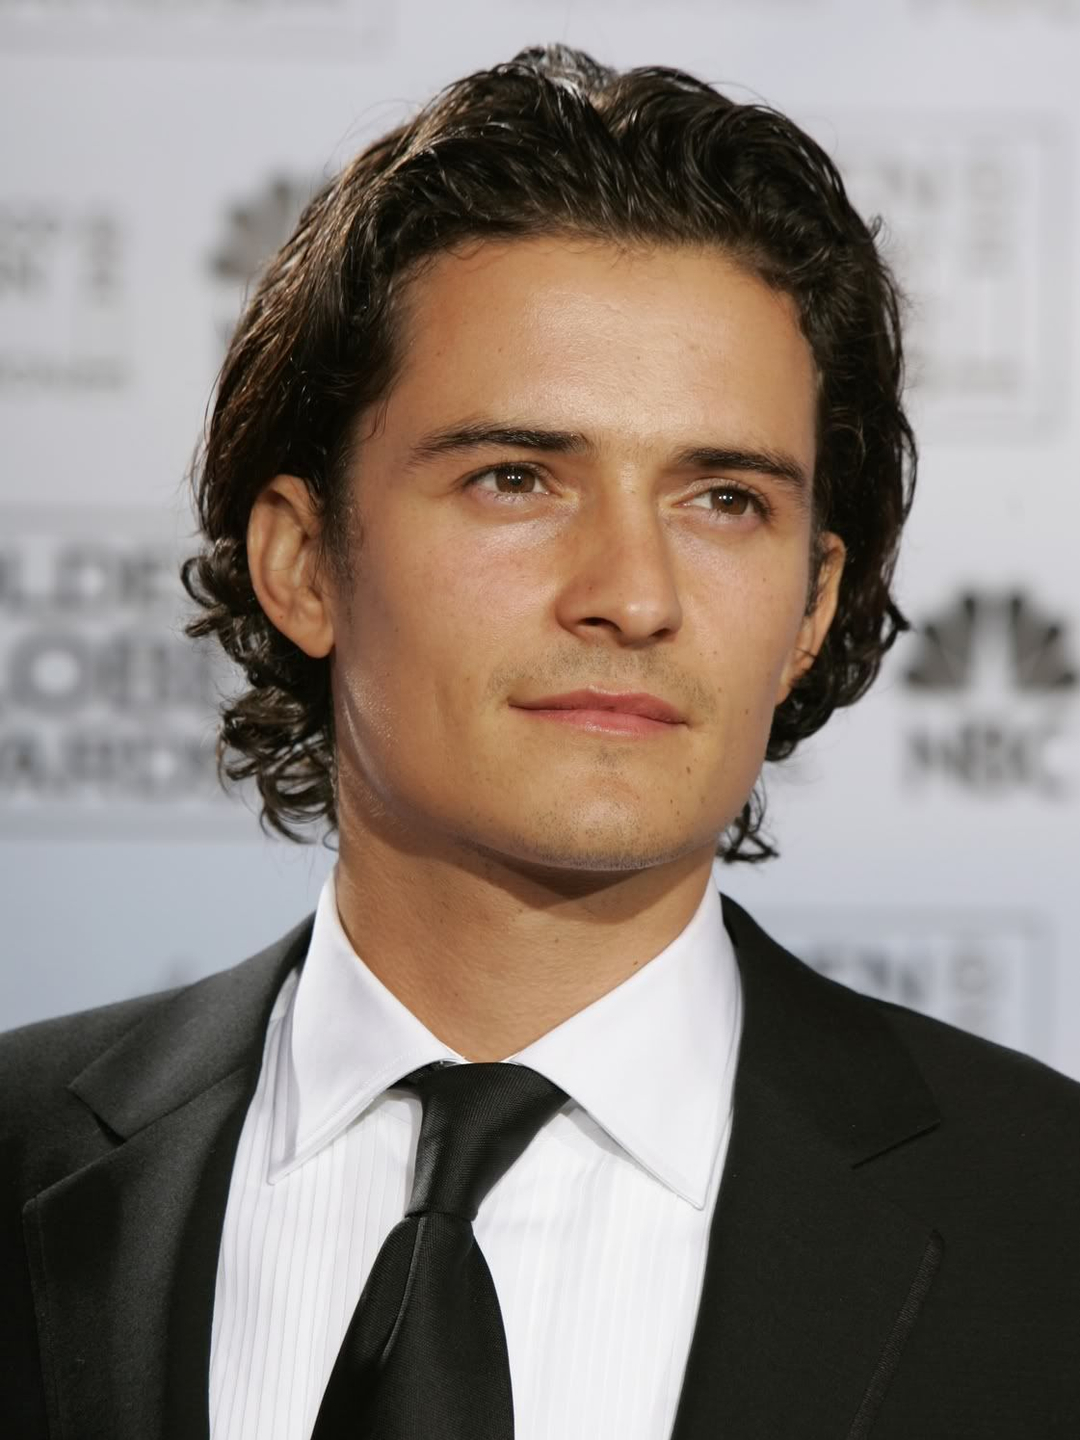 Orlando Bloom in real life